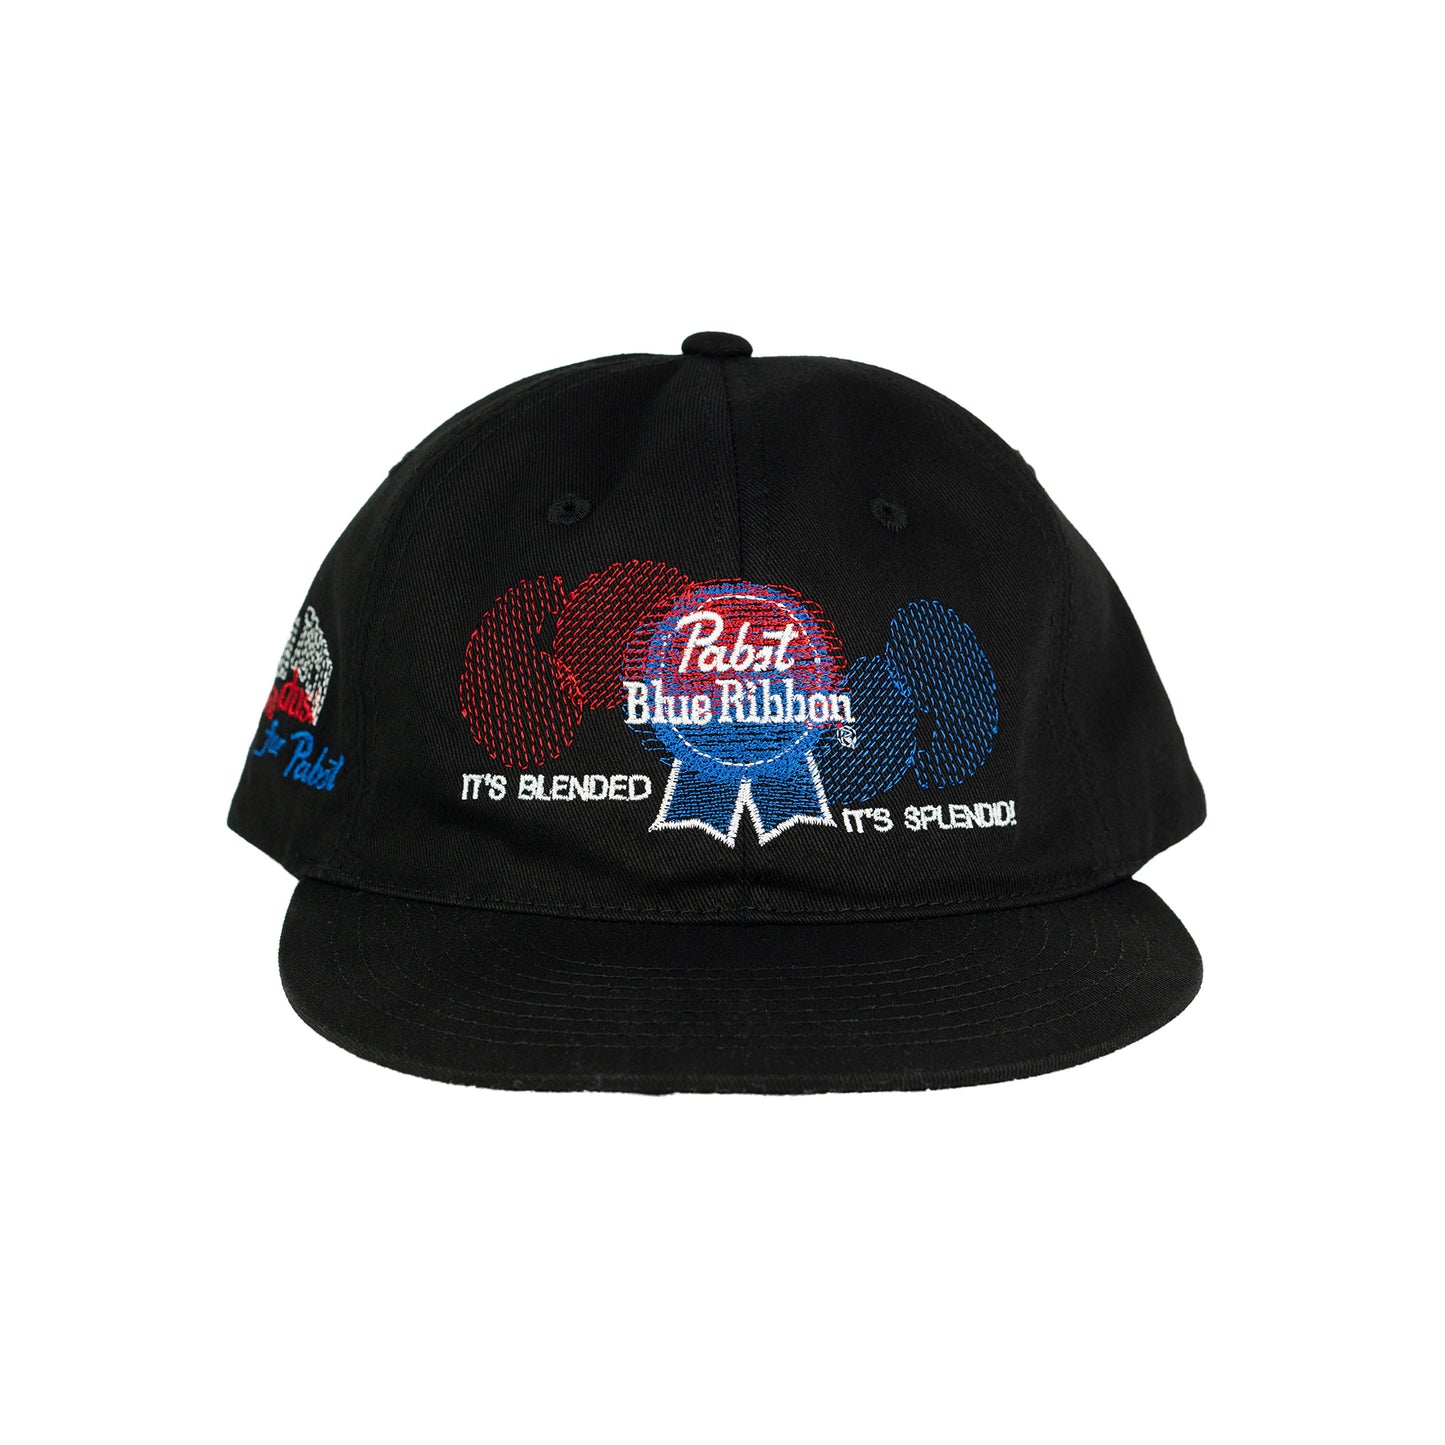 Koreatown x Towndust hat for Pabst Blue Ribbon